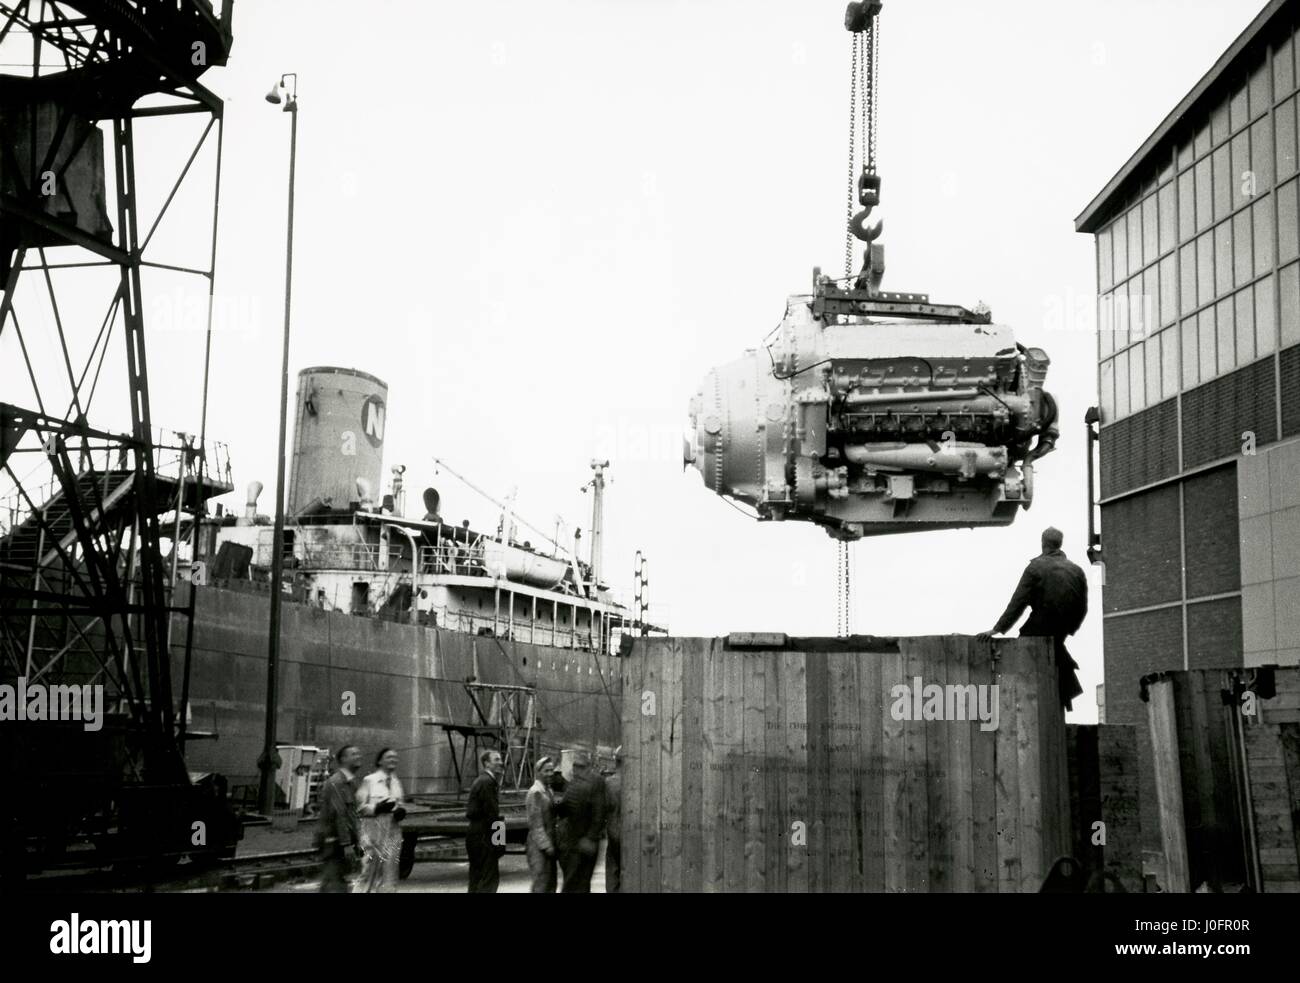 Deltic marine compound engine hanging suspended from a lifting hook Stock Photo